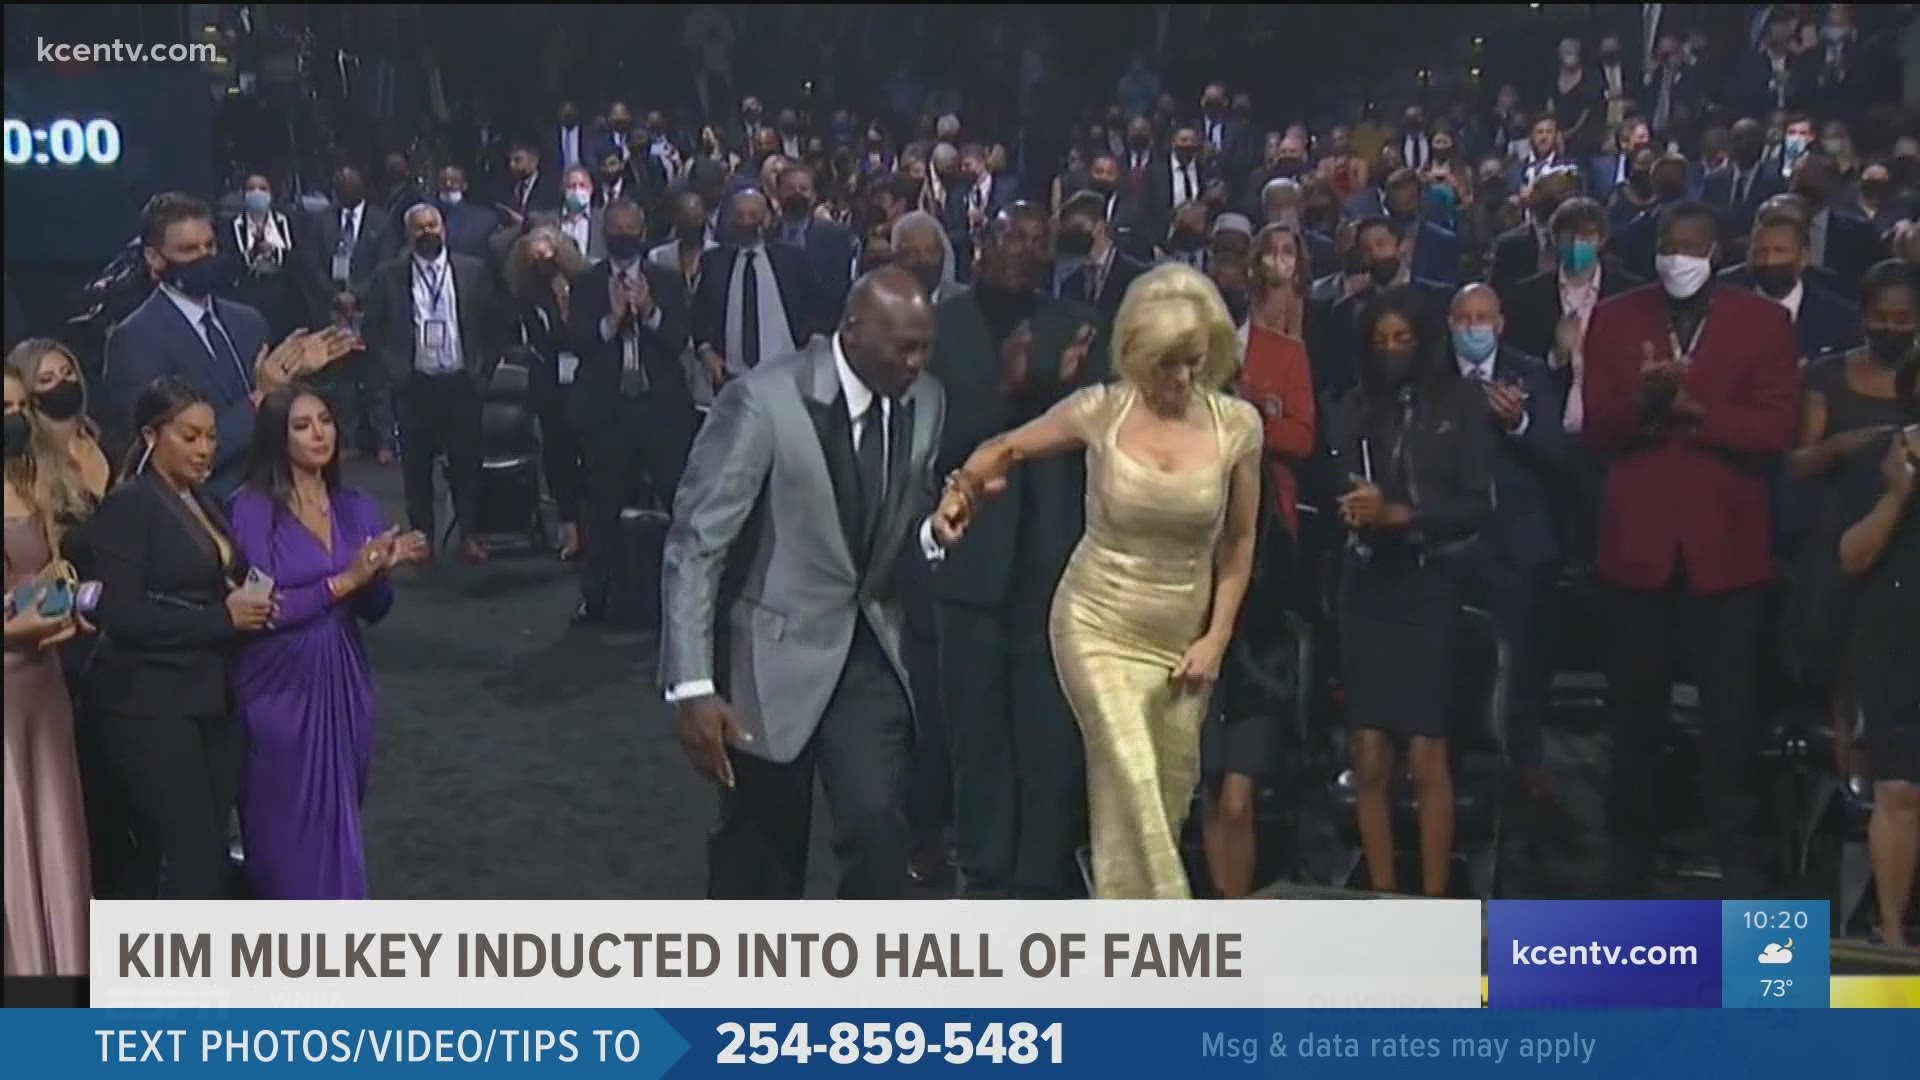 Mulkey was inducted into the Hall of Fame alongside eight others and was presented by Michael Jordan